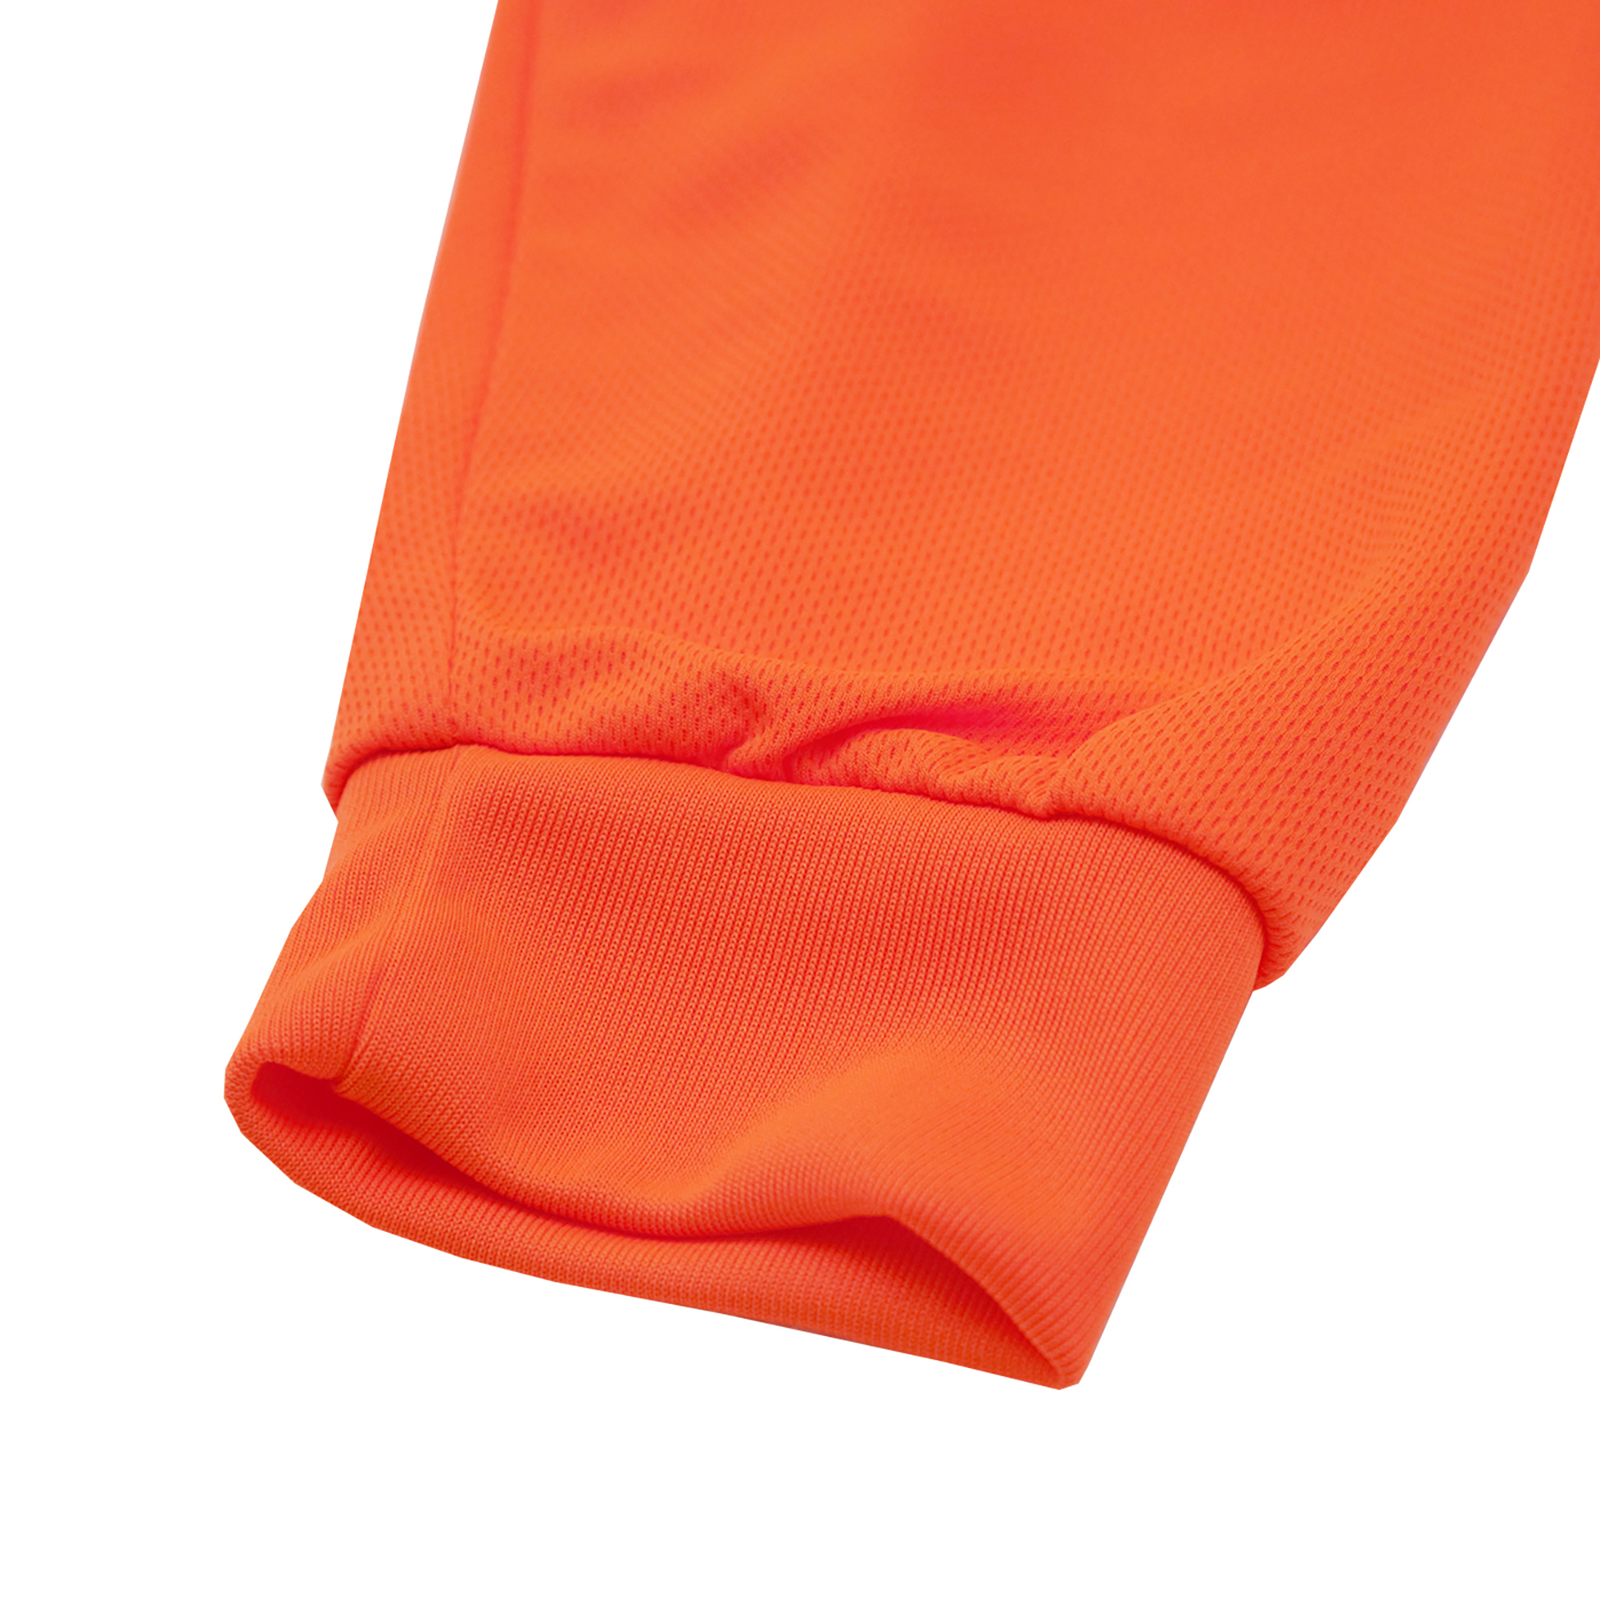 Close up of the elastic cuff of the long sleeve vi-vis orange work shirts